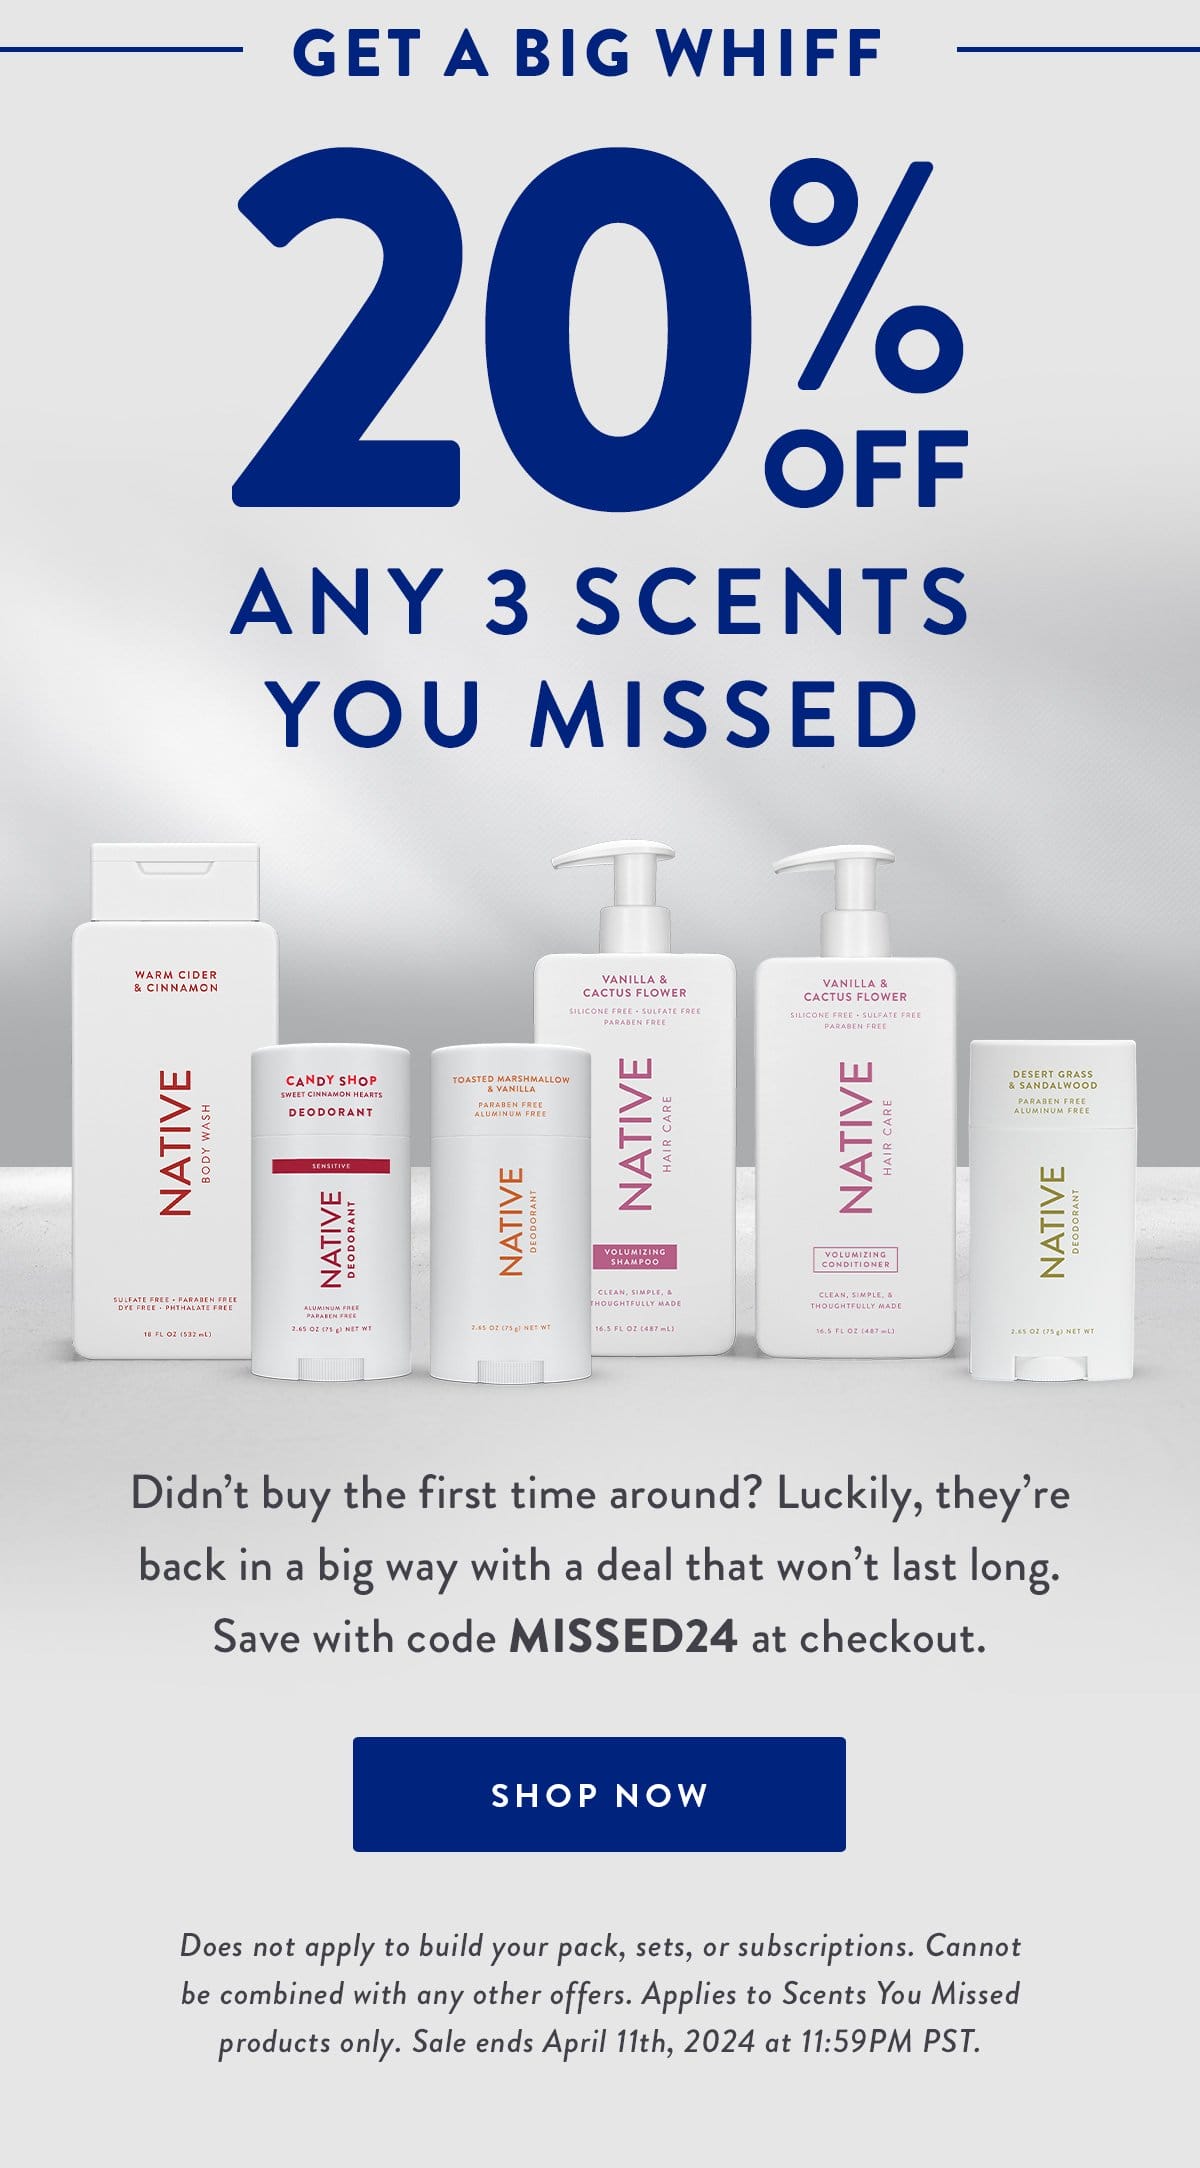 GET A BIG WHIFF | 20% OFF ANY 3 SCENTS YOU MISSED | Didn't buy the first time around? Luckily, they're back in a big way with a deal that won't last long. Save with code MISSED24 at checkout. | SHOP NOW | Does not apply to build your pack, sets, or subscriptions. Cannot be combined with any other offers. Applies to Scents You Missed products only. Sale ends April 11th, 2024 at 11:59PM PST.